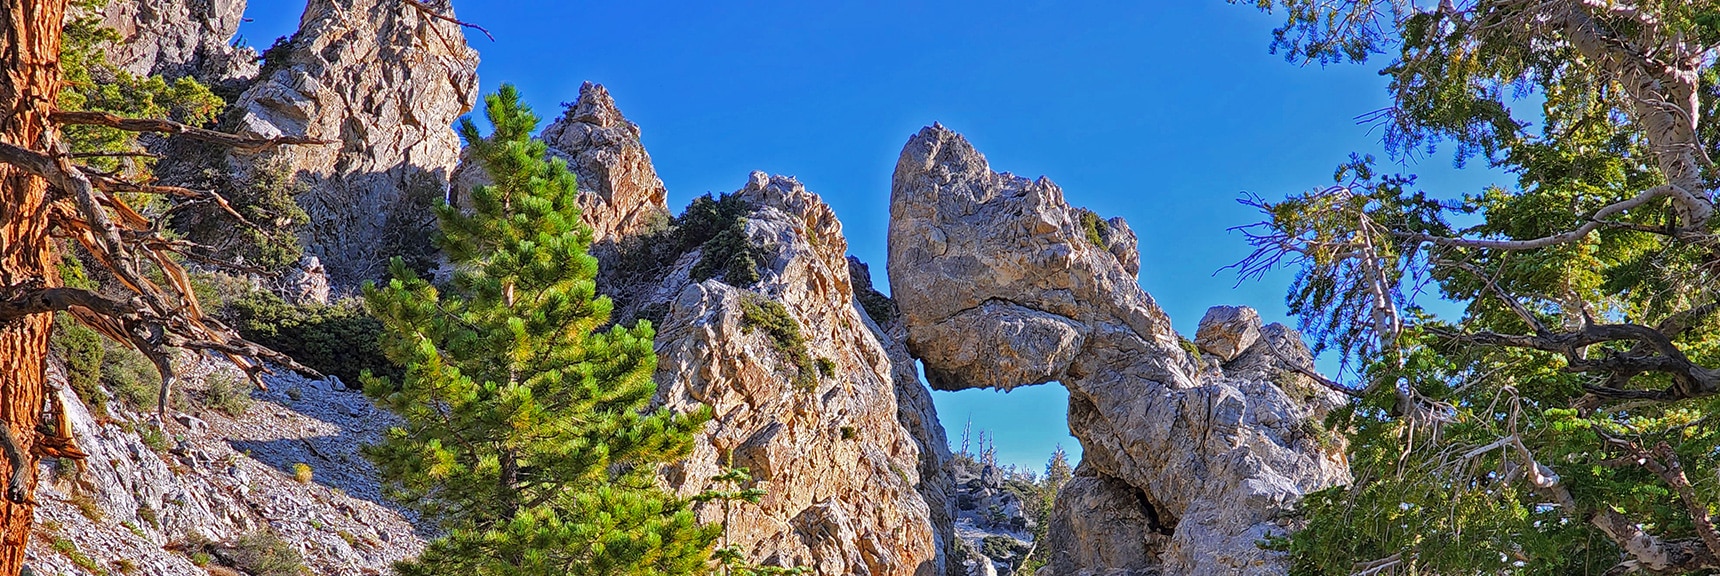 Close-up of Arch on Ascent Ridge | Sisters North | Lee Canyon | Mt Charleston Wilderness | Spring Mountains, Nevada